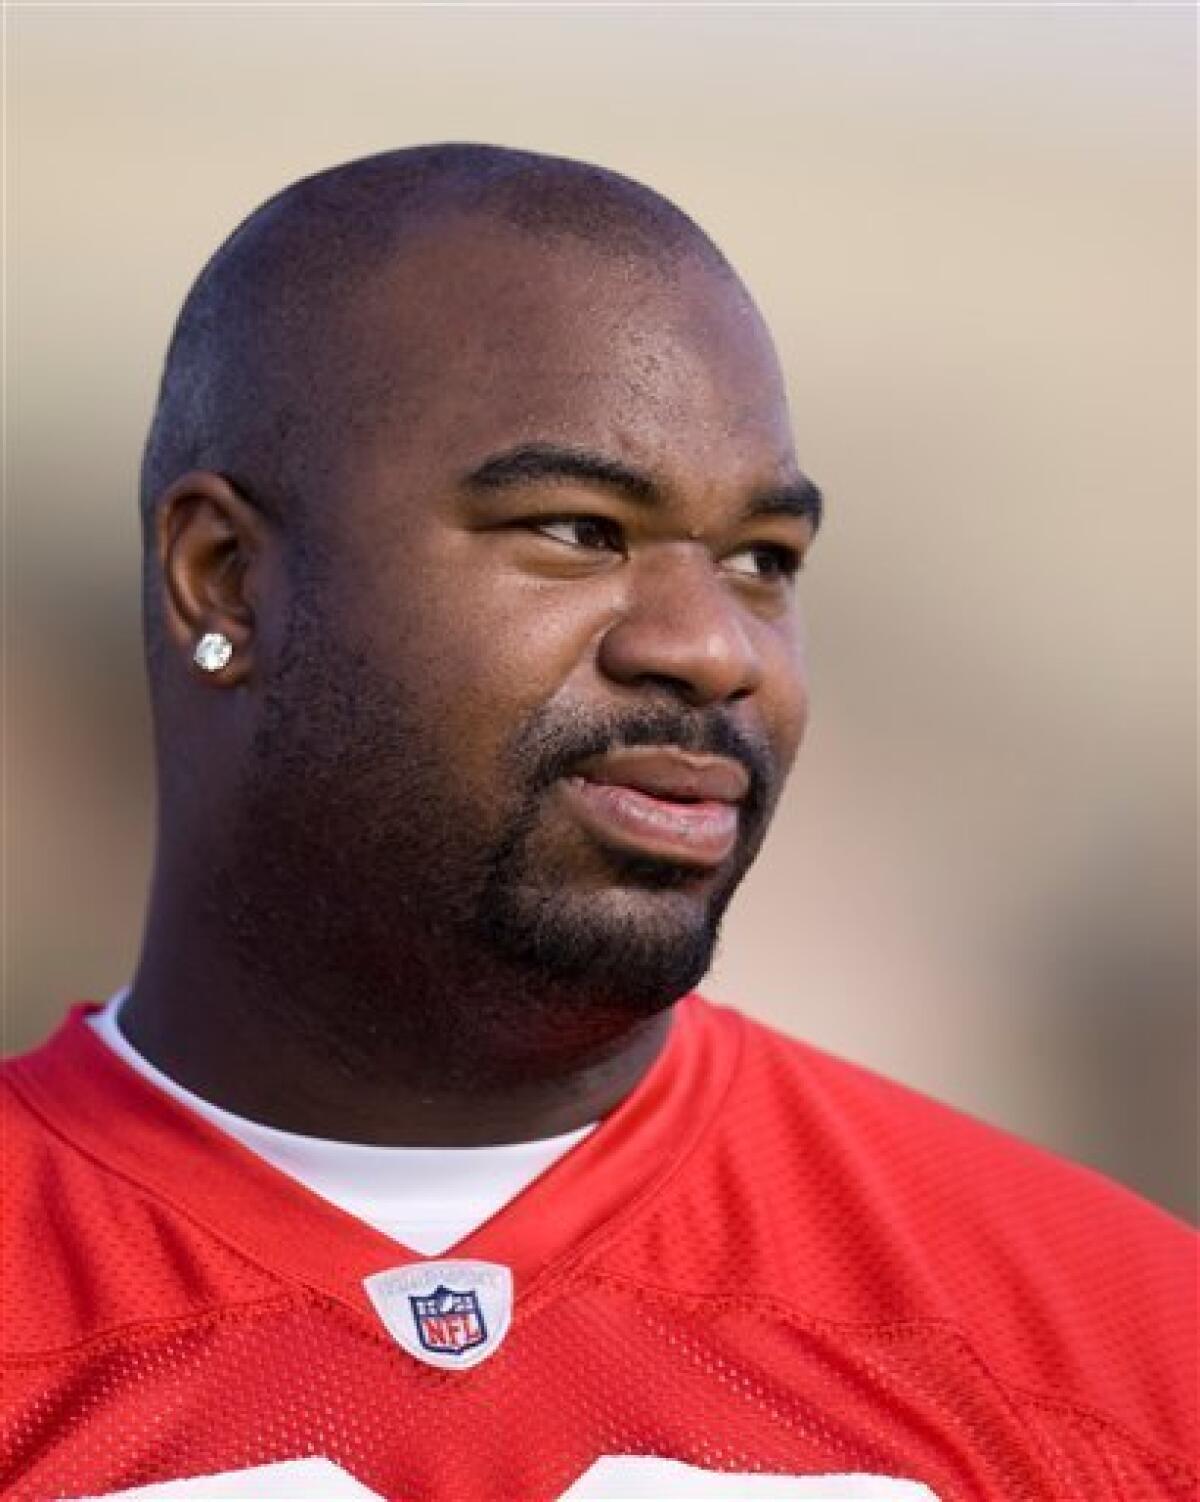 This Feb. 5, 2009 file photo shows Tennessee Titans defensive tackle Albert Haynesworth looking on during AFC Pro Bowl football practice, in Kapolei, Hawaii. Haynesworth, Tennessee's franchise player in 2008, had his best season knowing that he would be a free agent again this year. (AP Photo/Marco Garcia, File)